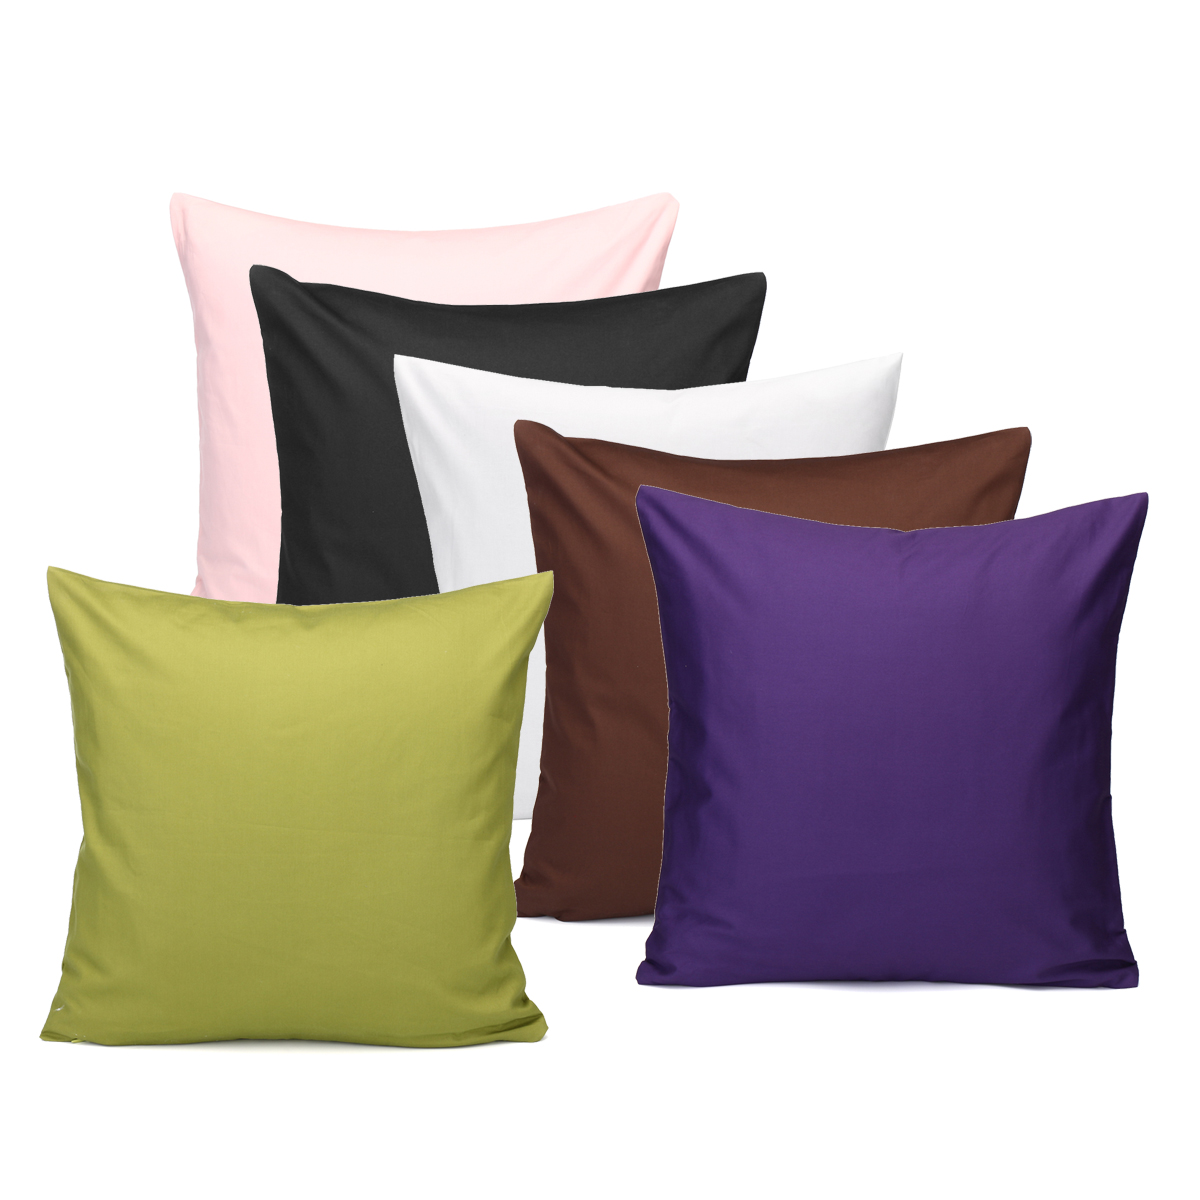 Cotton-Pillow-Case-Solid-Color-Cushion-Cover-Throw-Home-Sofa-Decoration-45X45cm-1579144-3